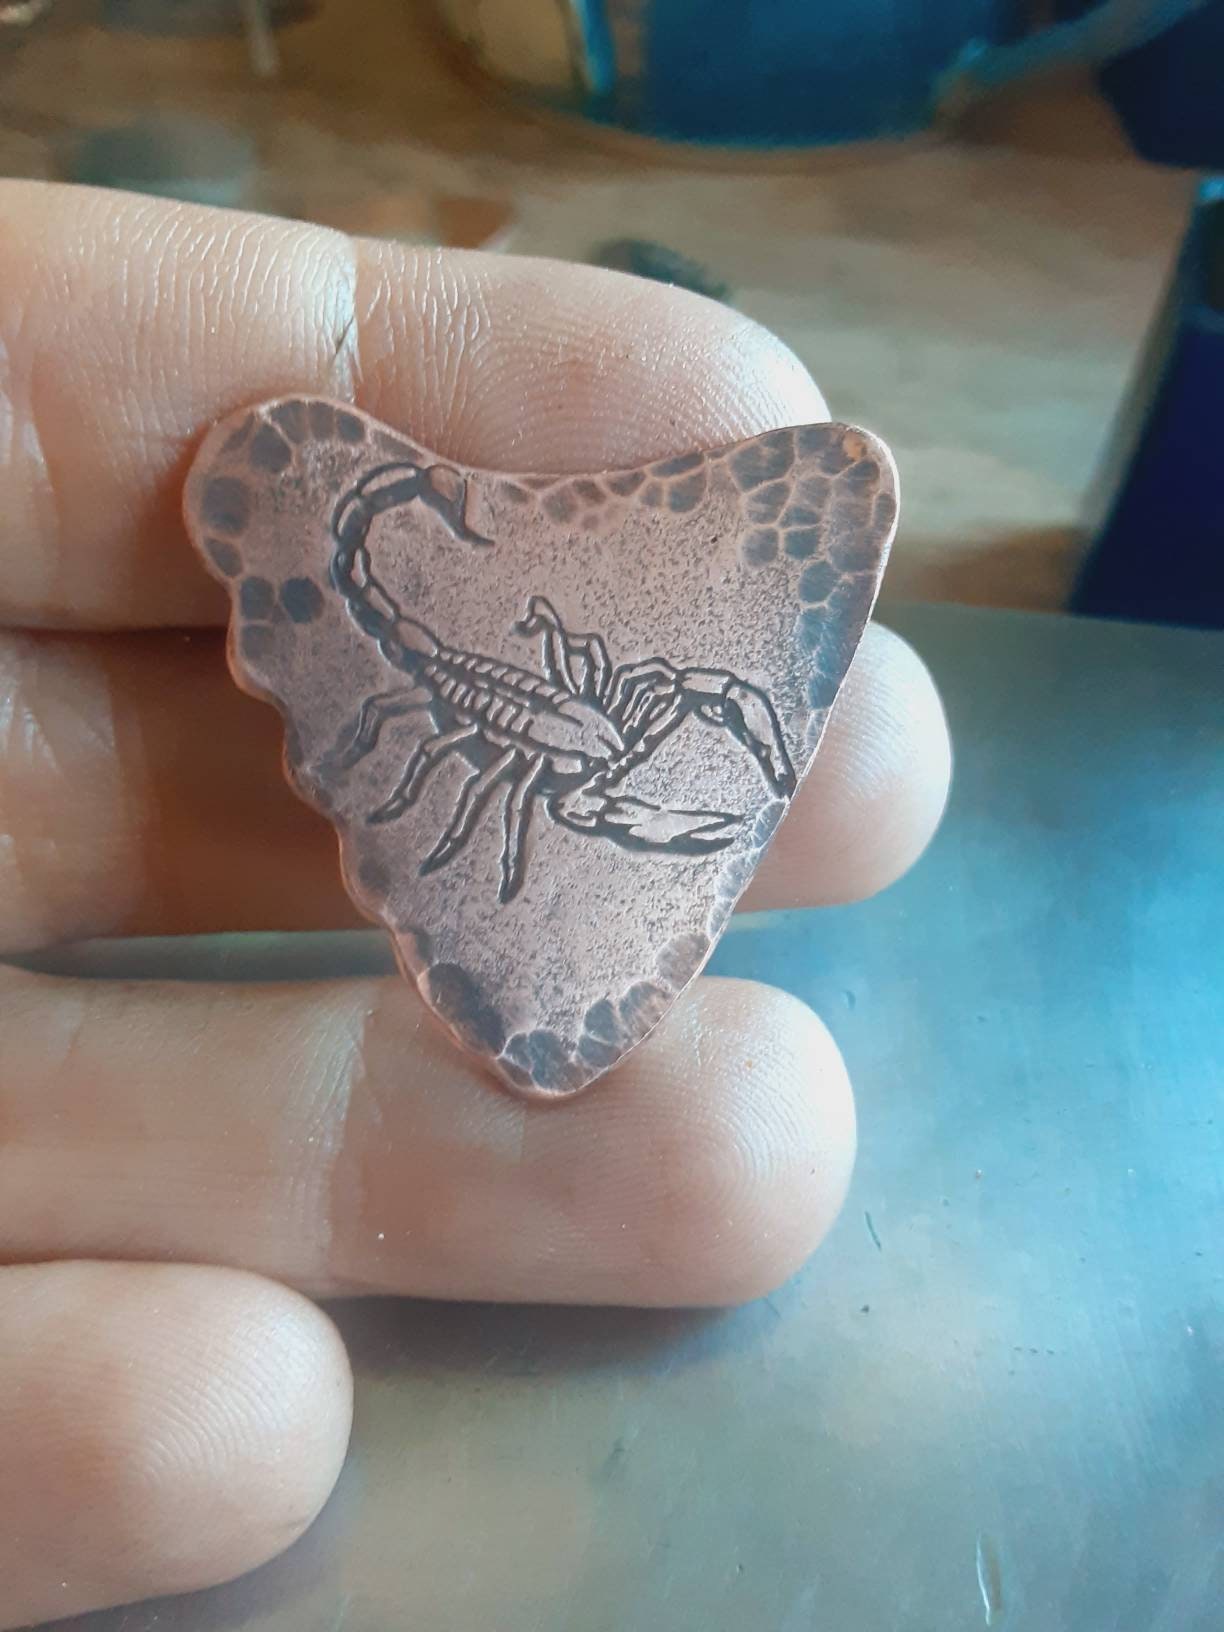 Copper shark tooth guitar pick with scorpion design